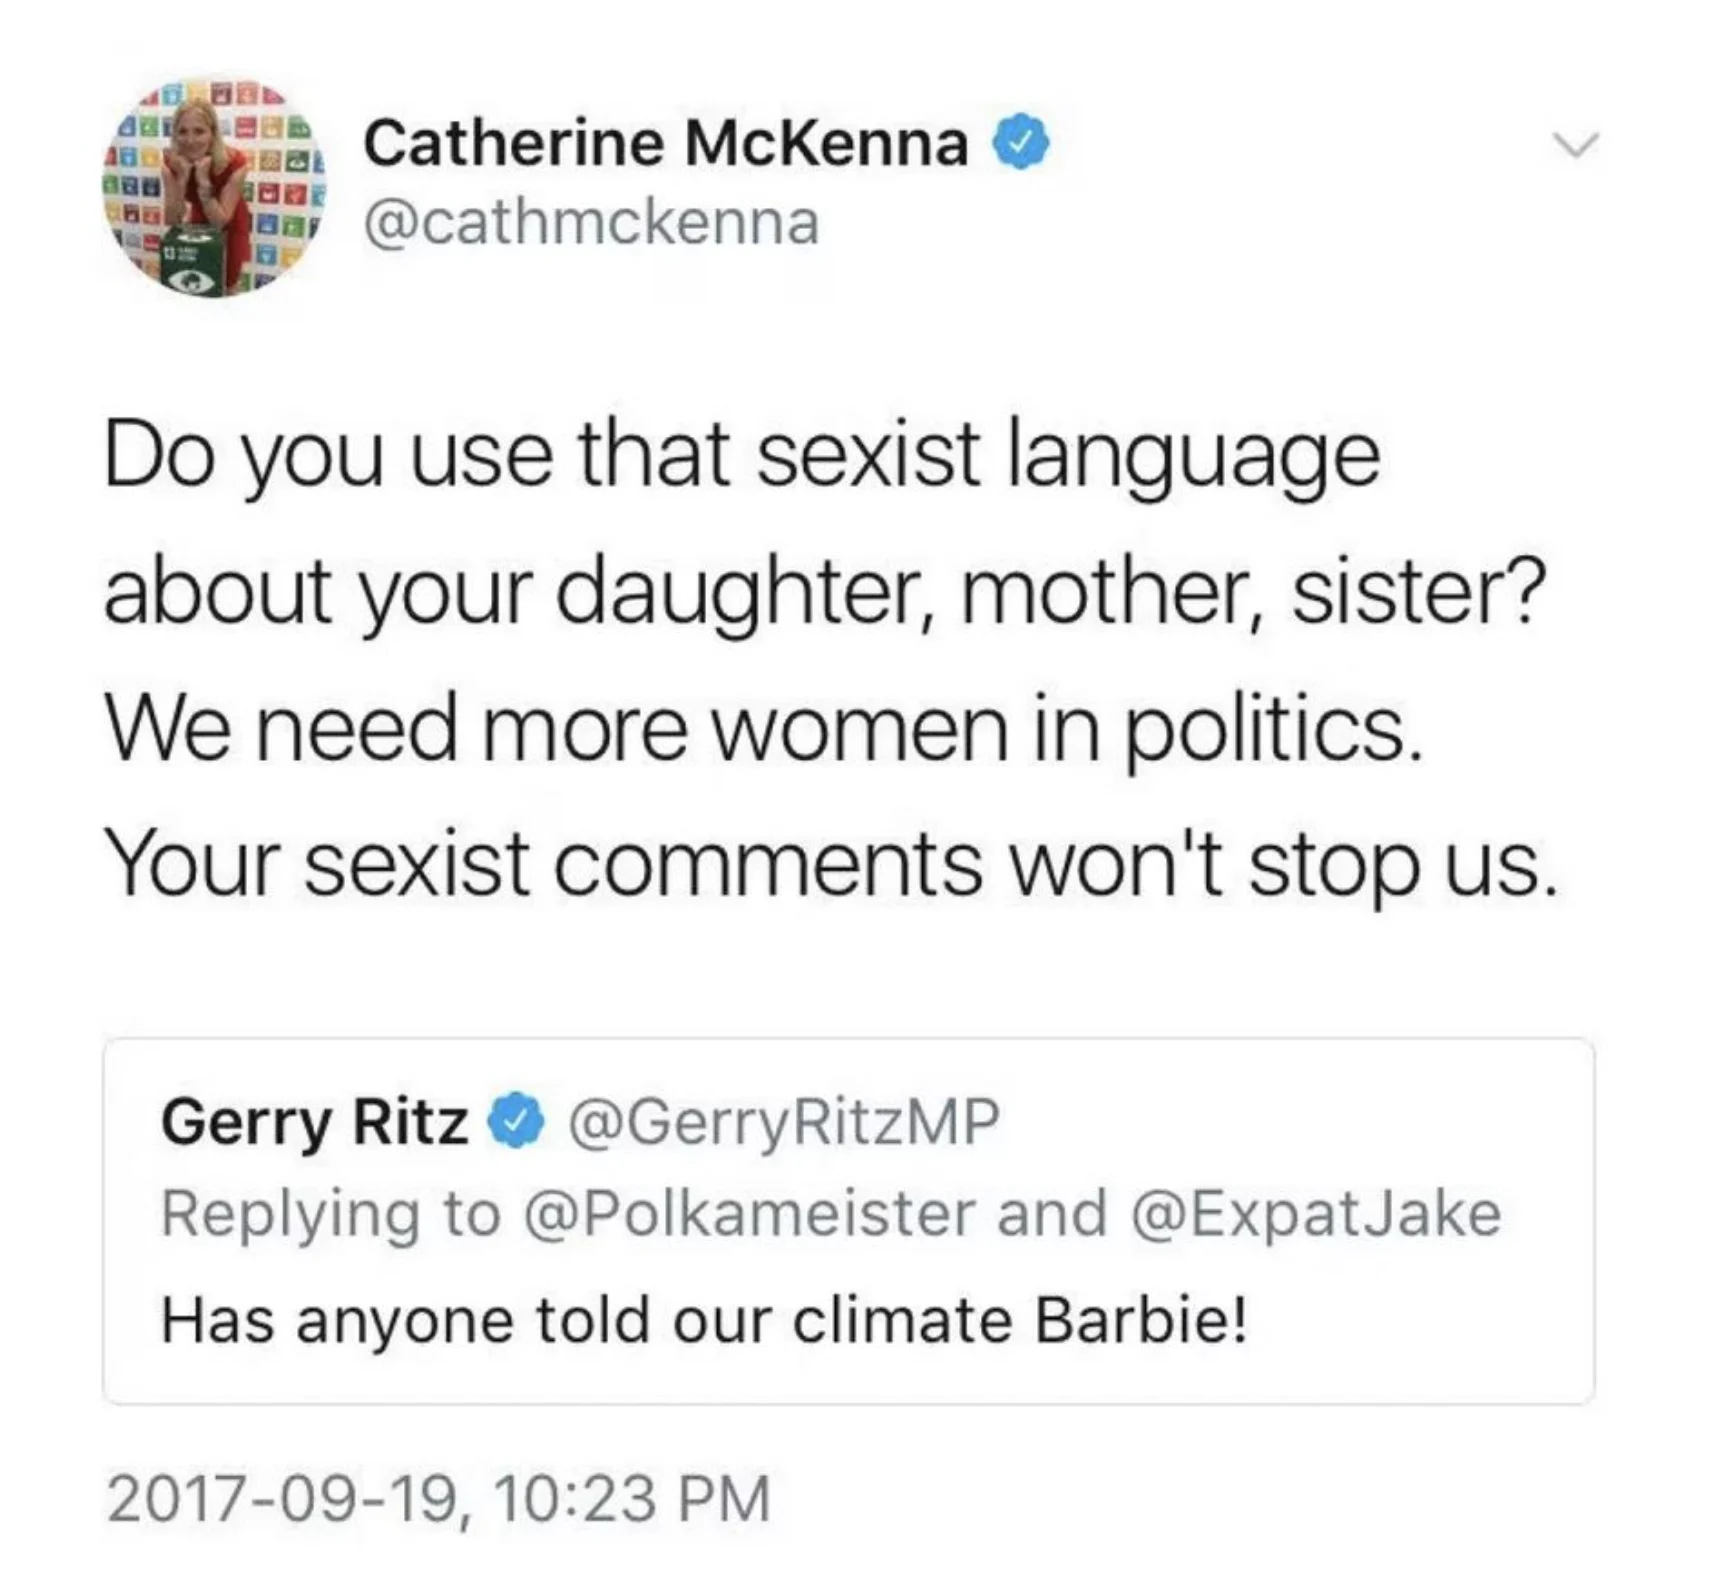 Tweet refers to Catharine McKenna as 'climate barbie' (Changemakers/The Weather Network)